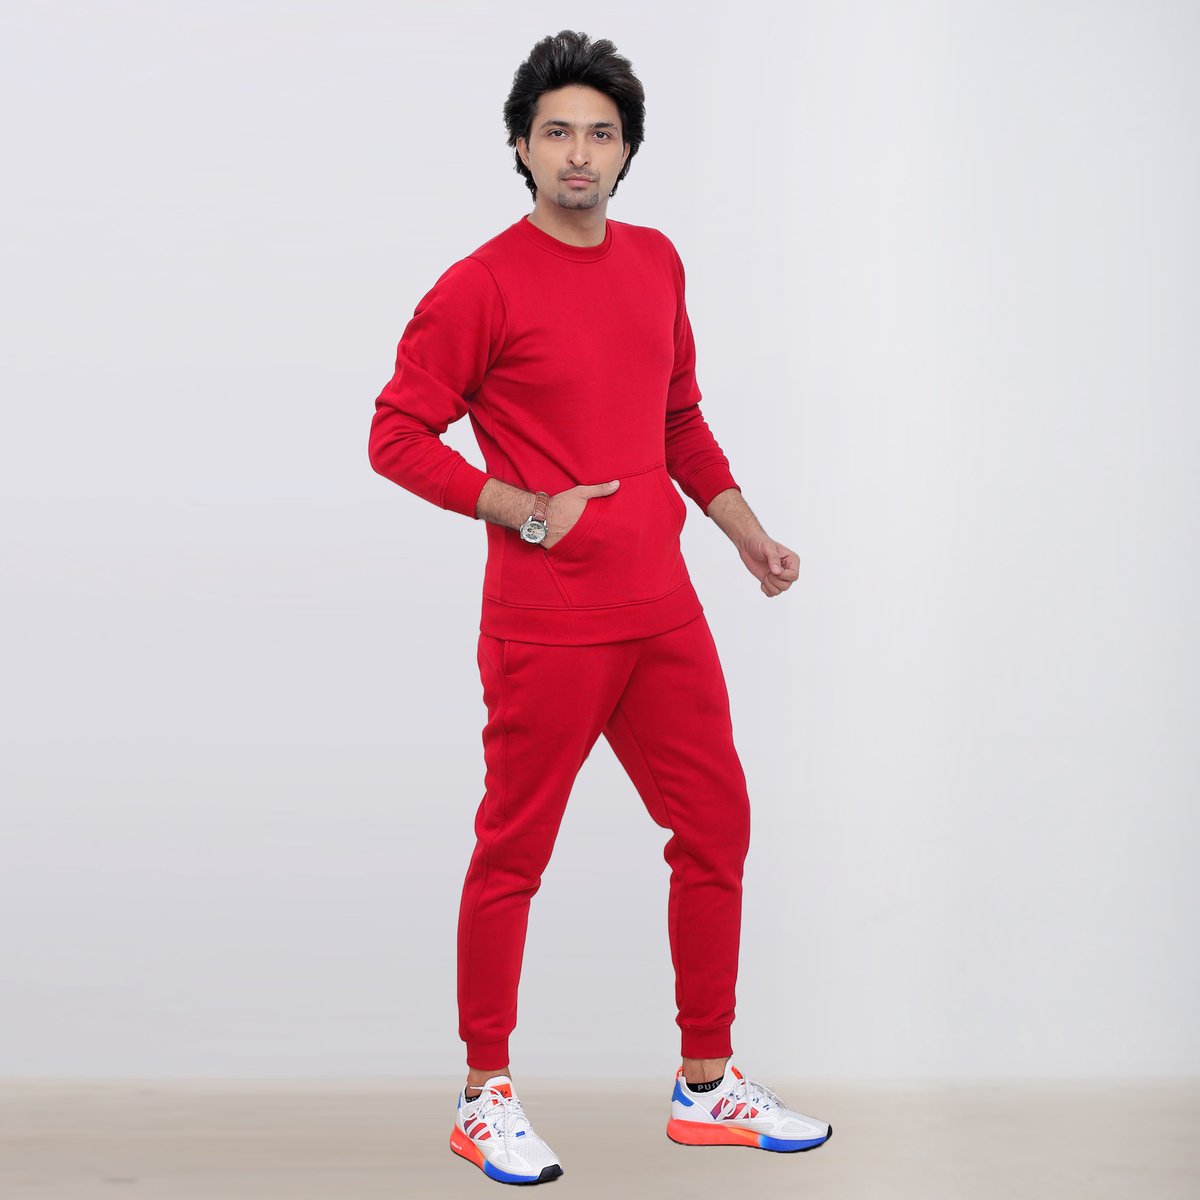 ICONICX Mens Plain Tracksuit Fleece Pullover Sweatshirt with Trousers Cotton Jogging Suit Exercise, Fitness, Boxing MMA, RED